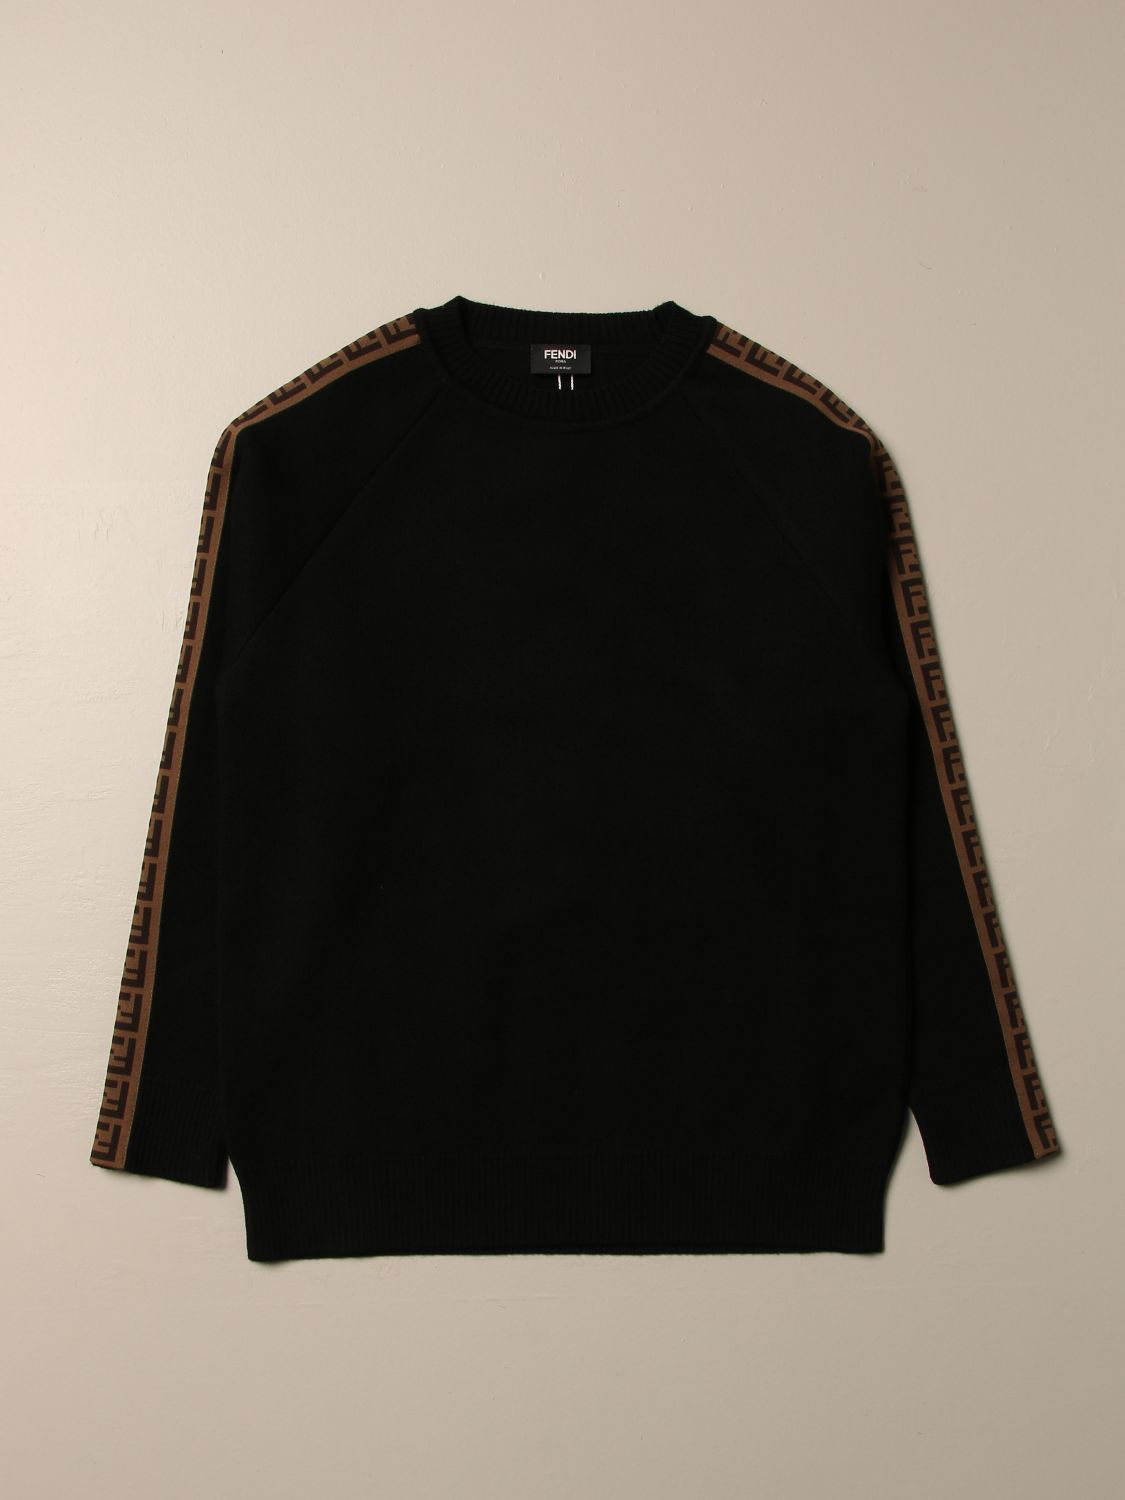 FENDI: crewneck sweater with all over FF bands | Sweater Fendi Kids ...